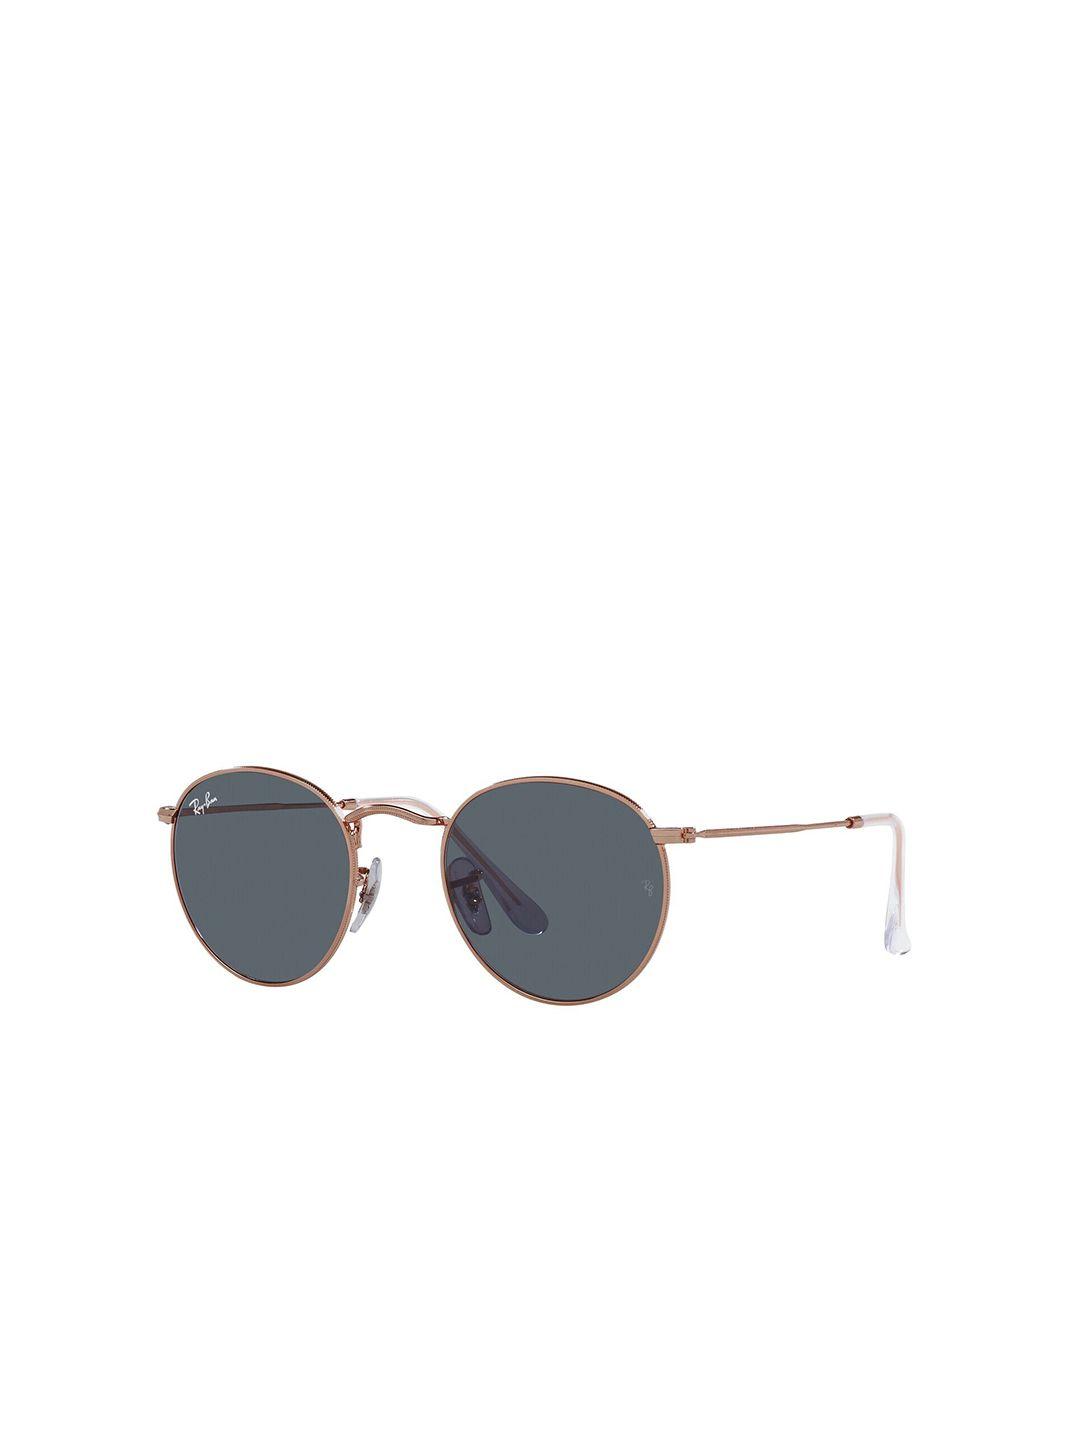 ray-ban-men-round-sunglasses-with-uv-protected-lens-8056597858496-rose-gold